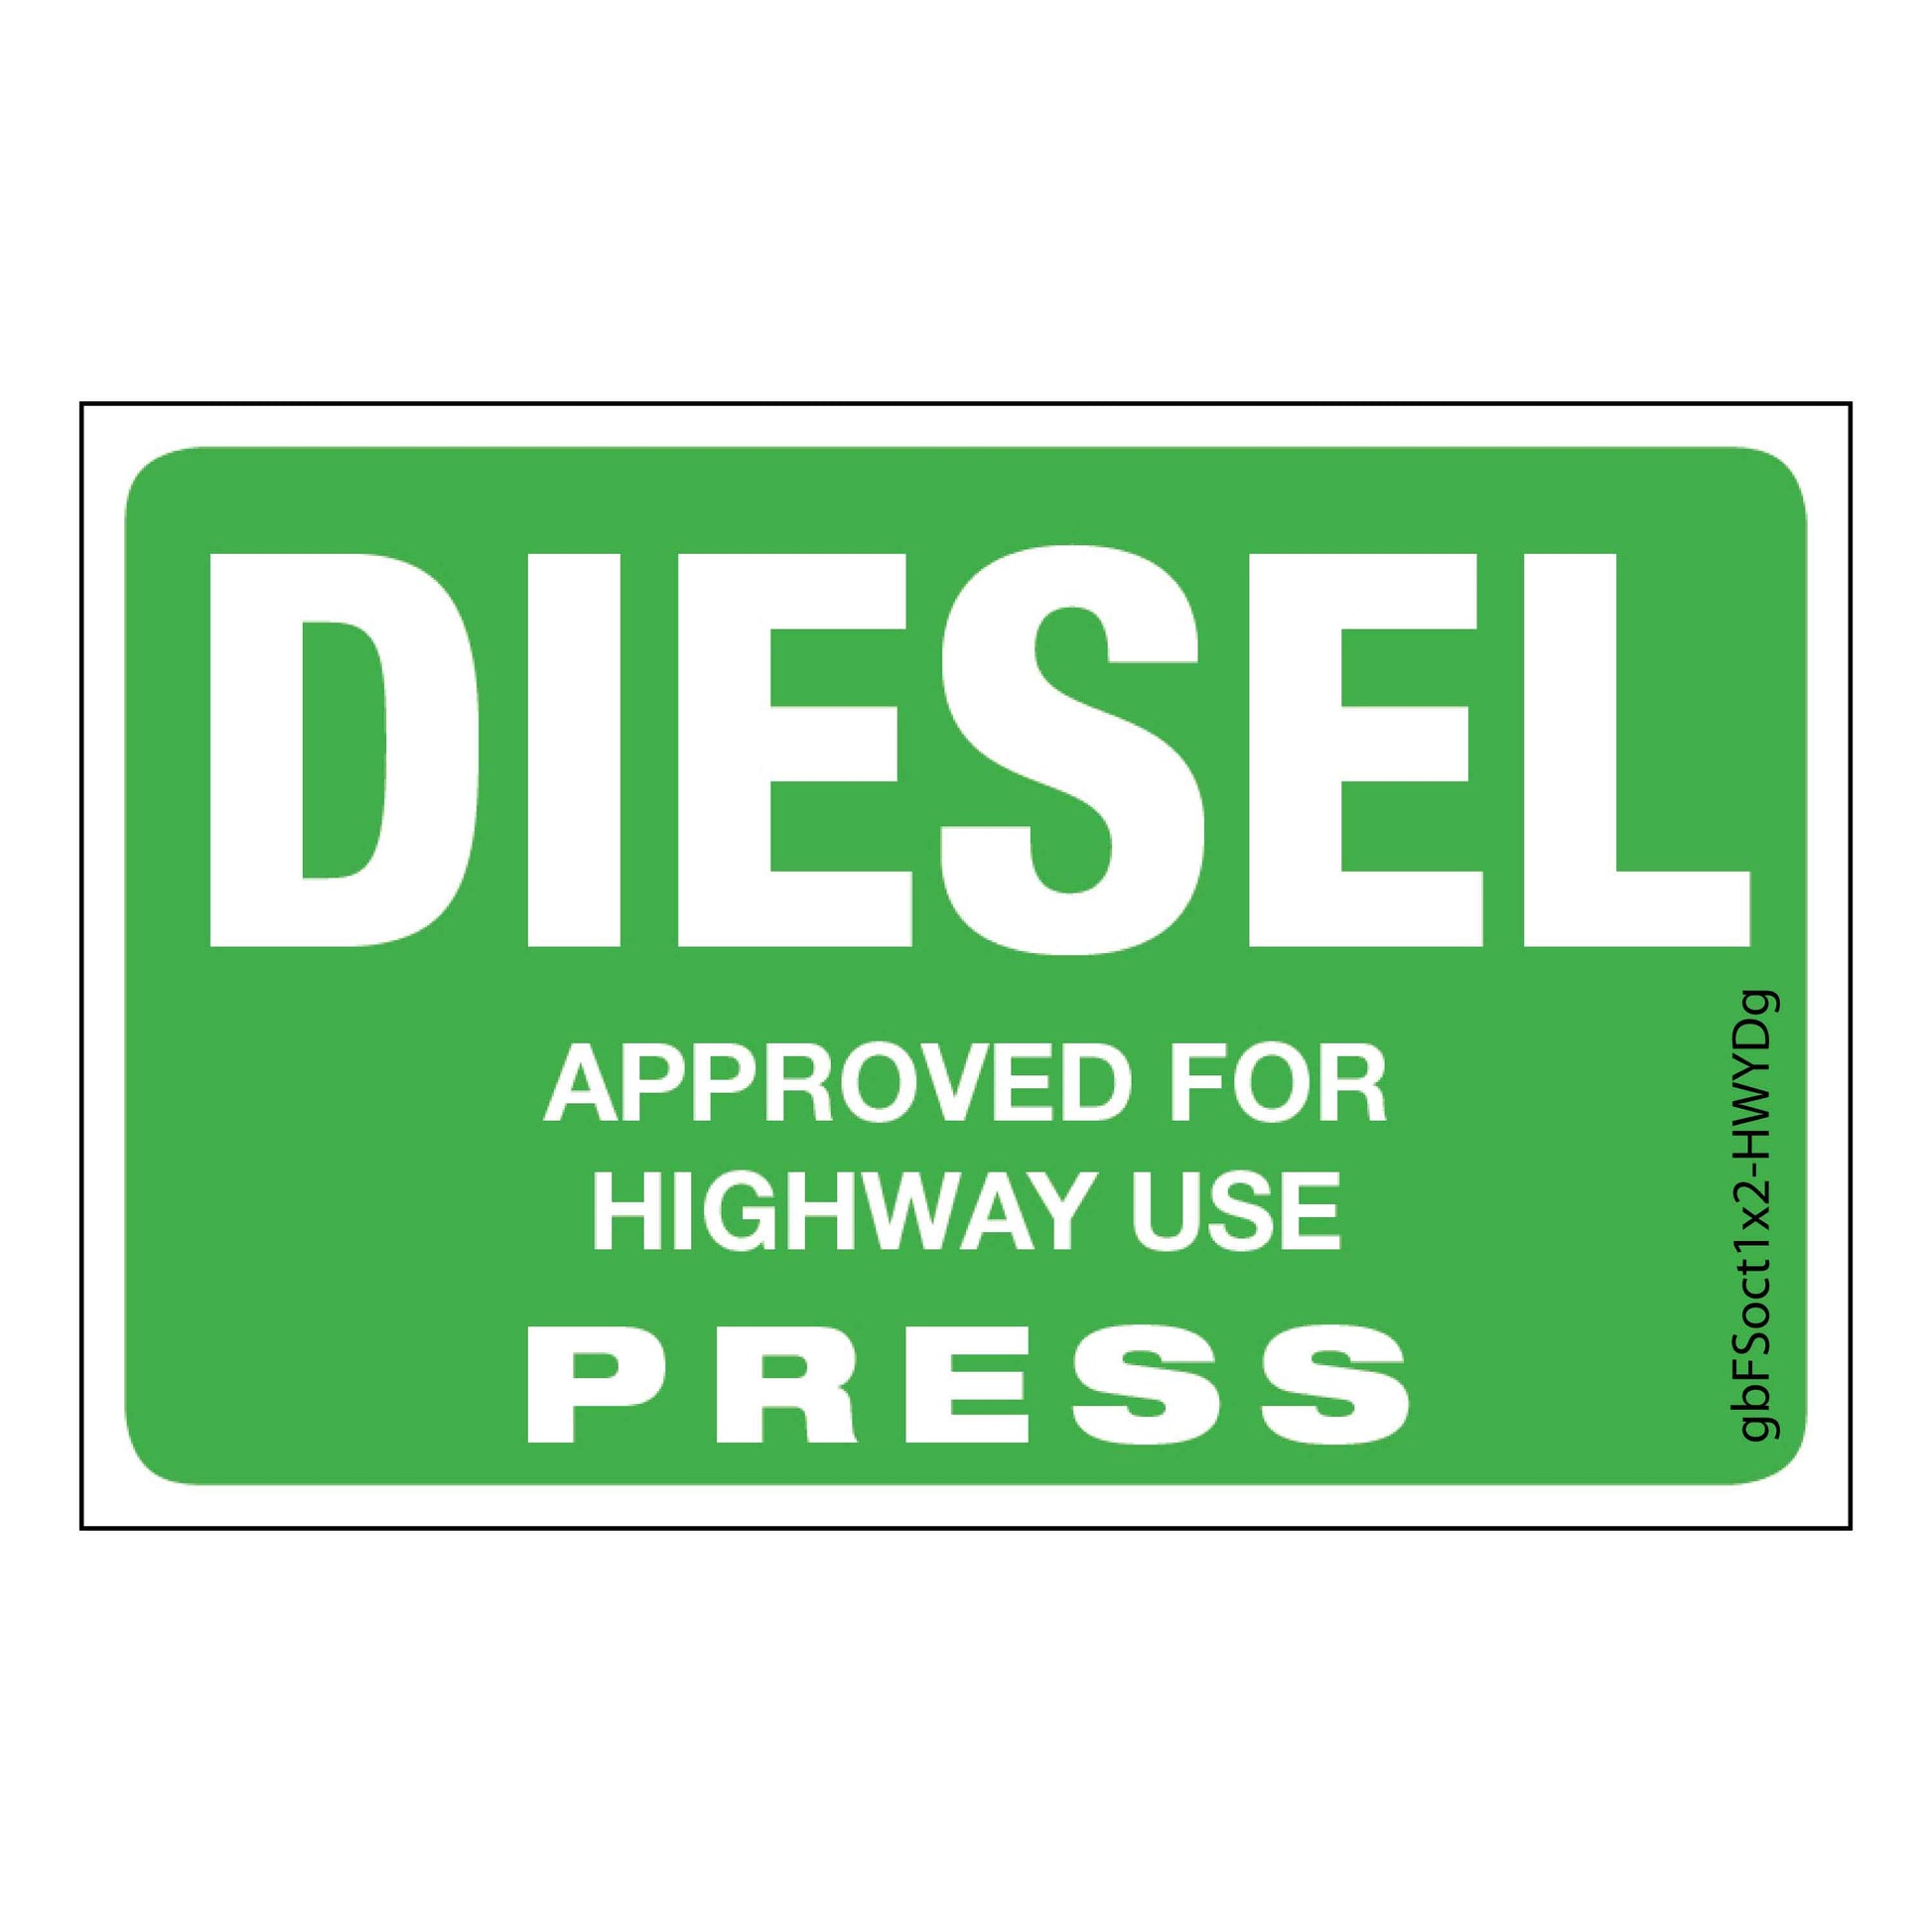 Diesel (On Road) Press Octane Rating Decal - Green. 1 inch by 2 inches in size. 